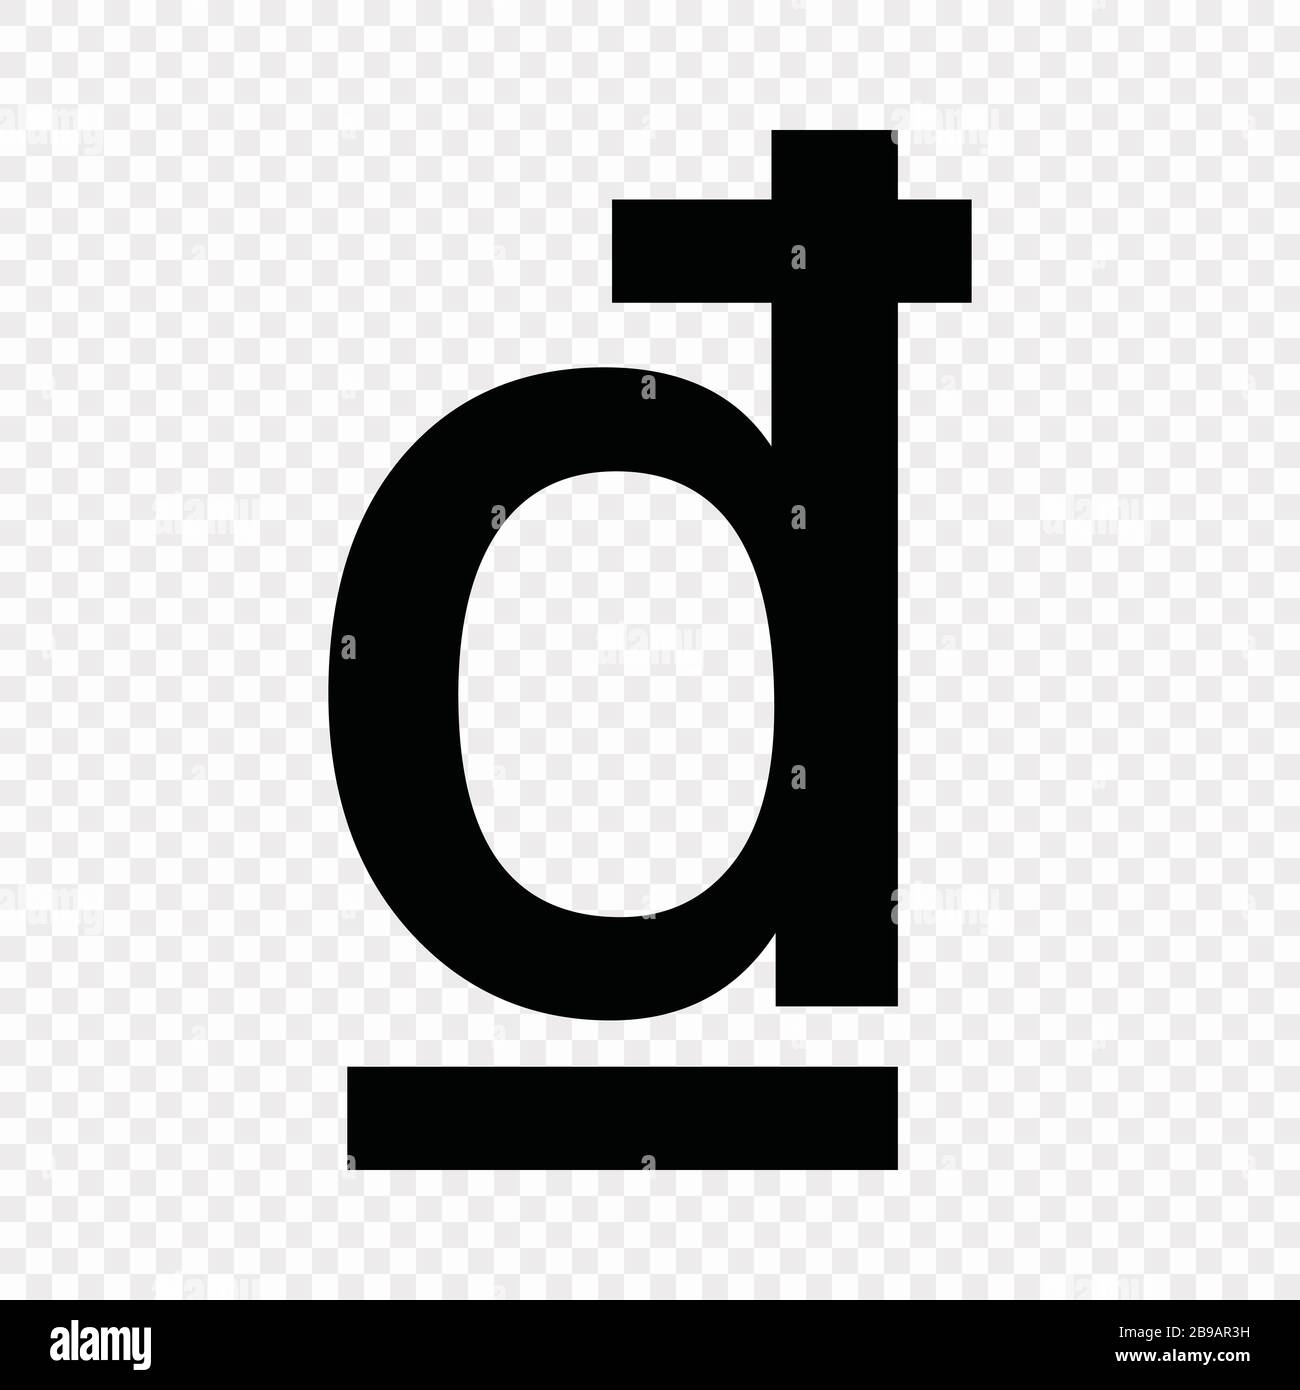 Vietnamese dong sign . Currency symbol icon Stock Vector